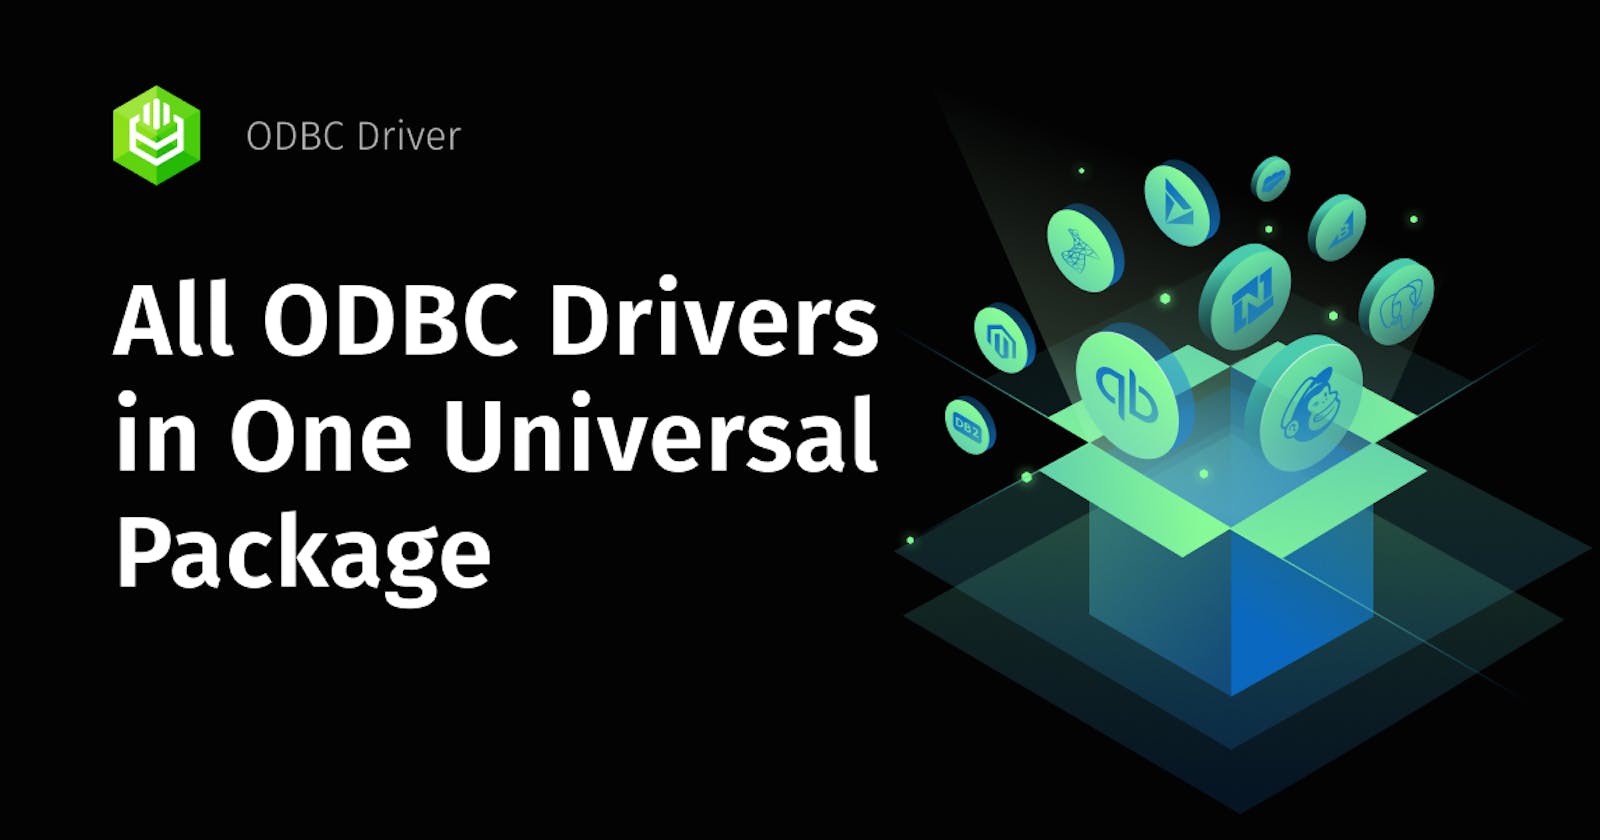 We are glad to announce our new product - ODBC Drivers Universal Bundle!